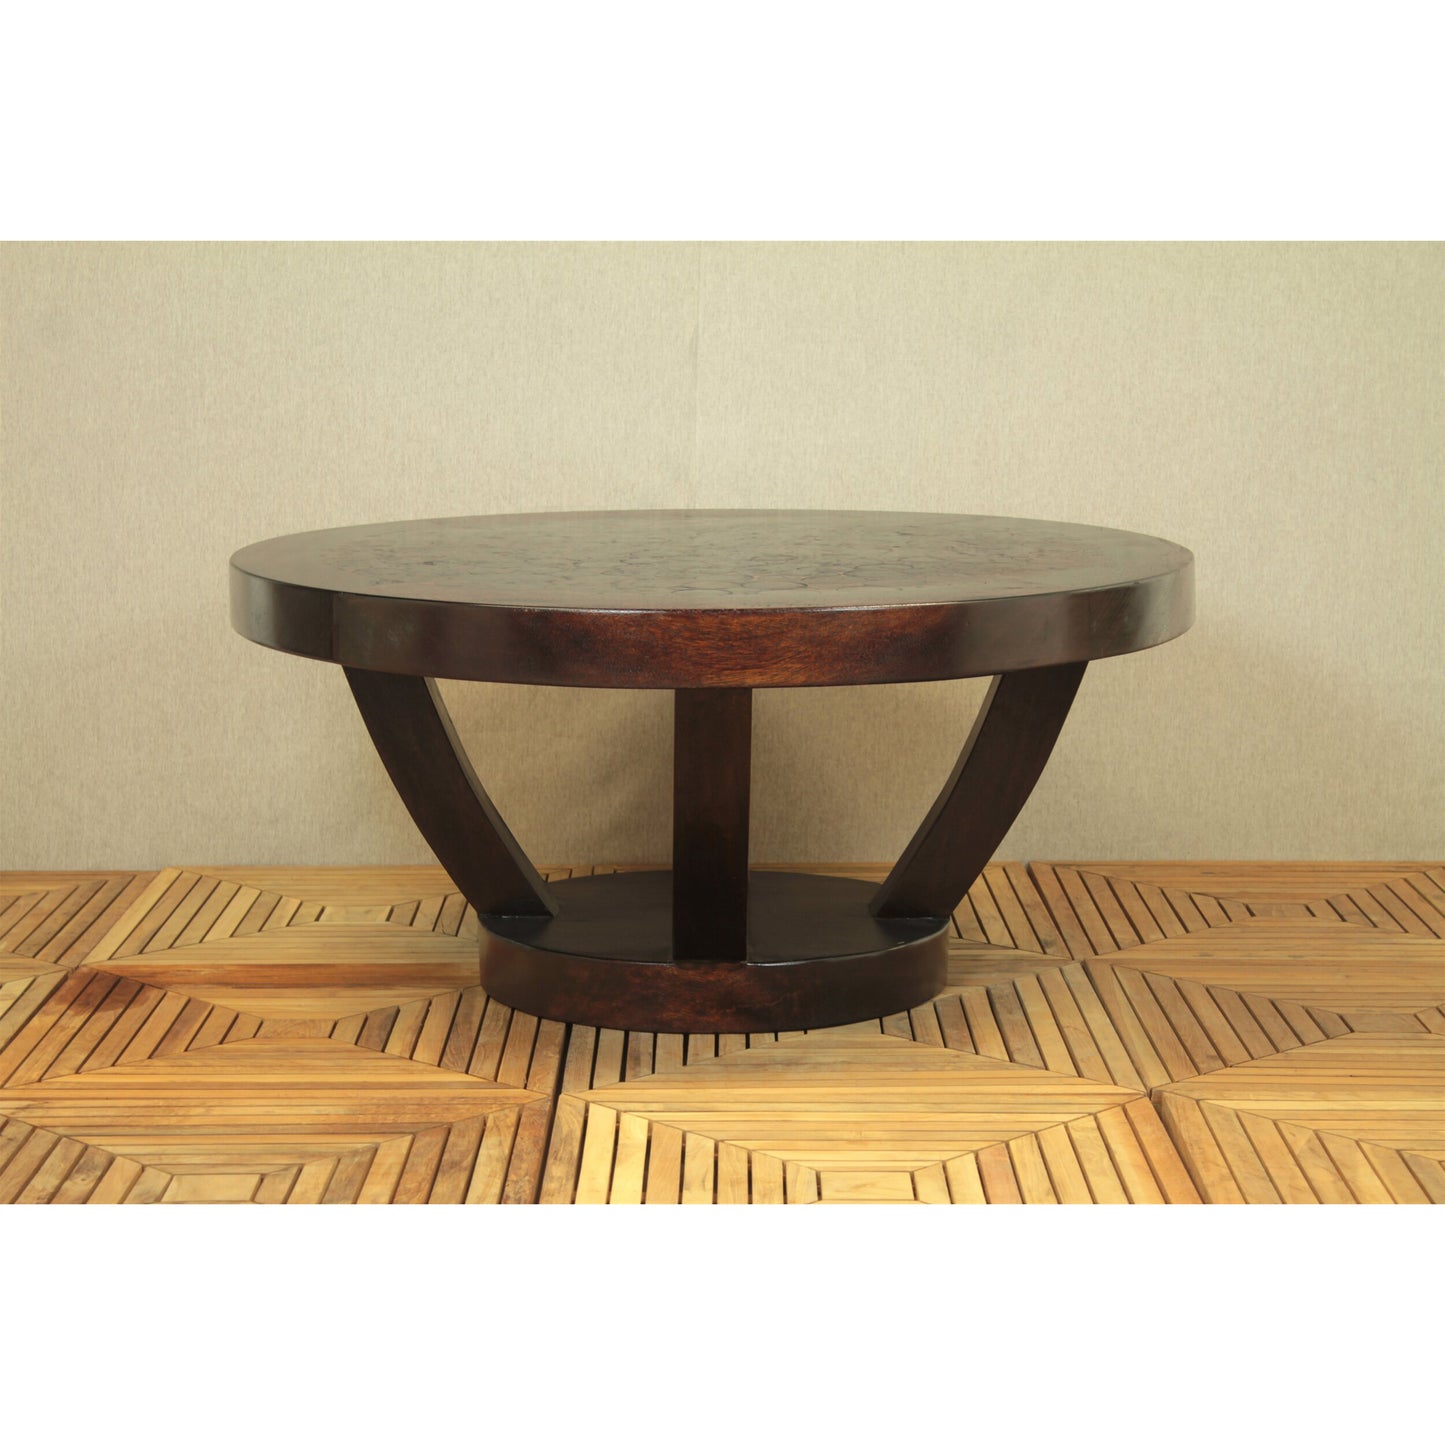 Balinese Round Coffee Table